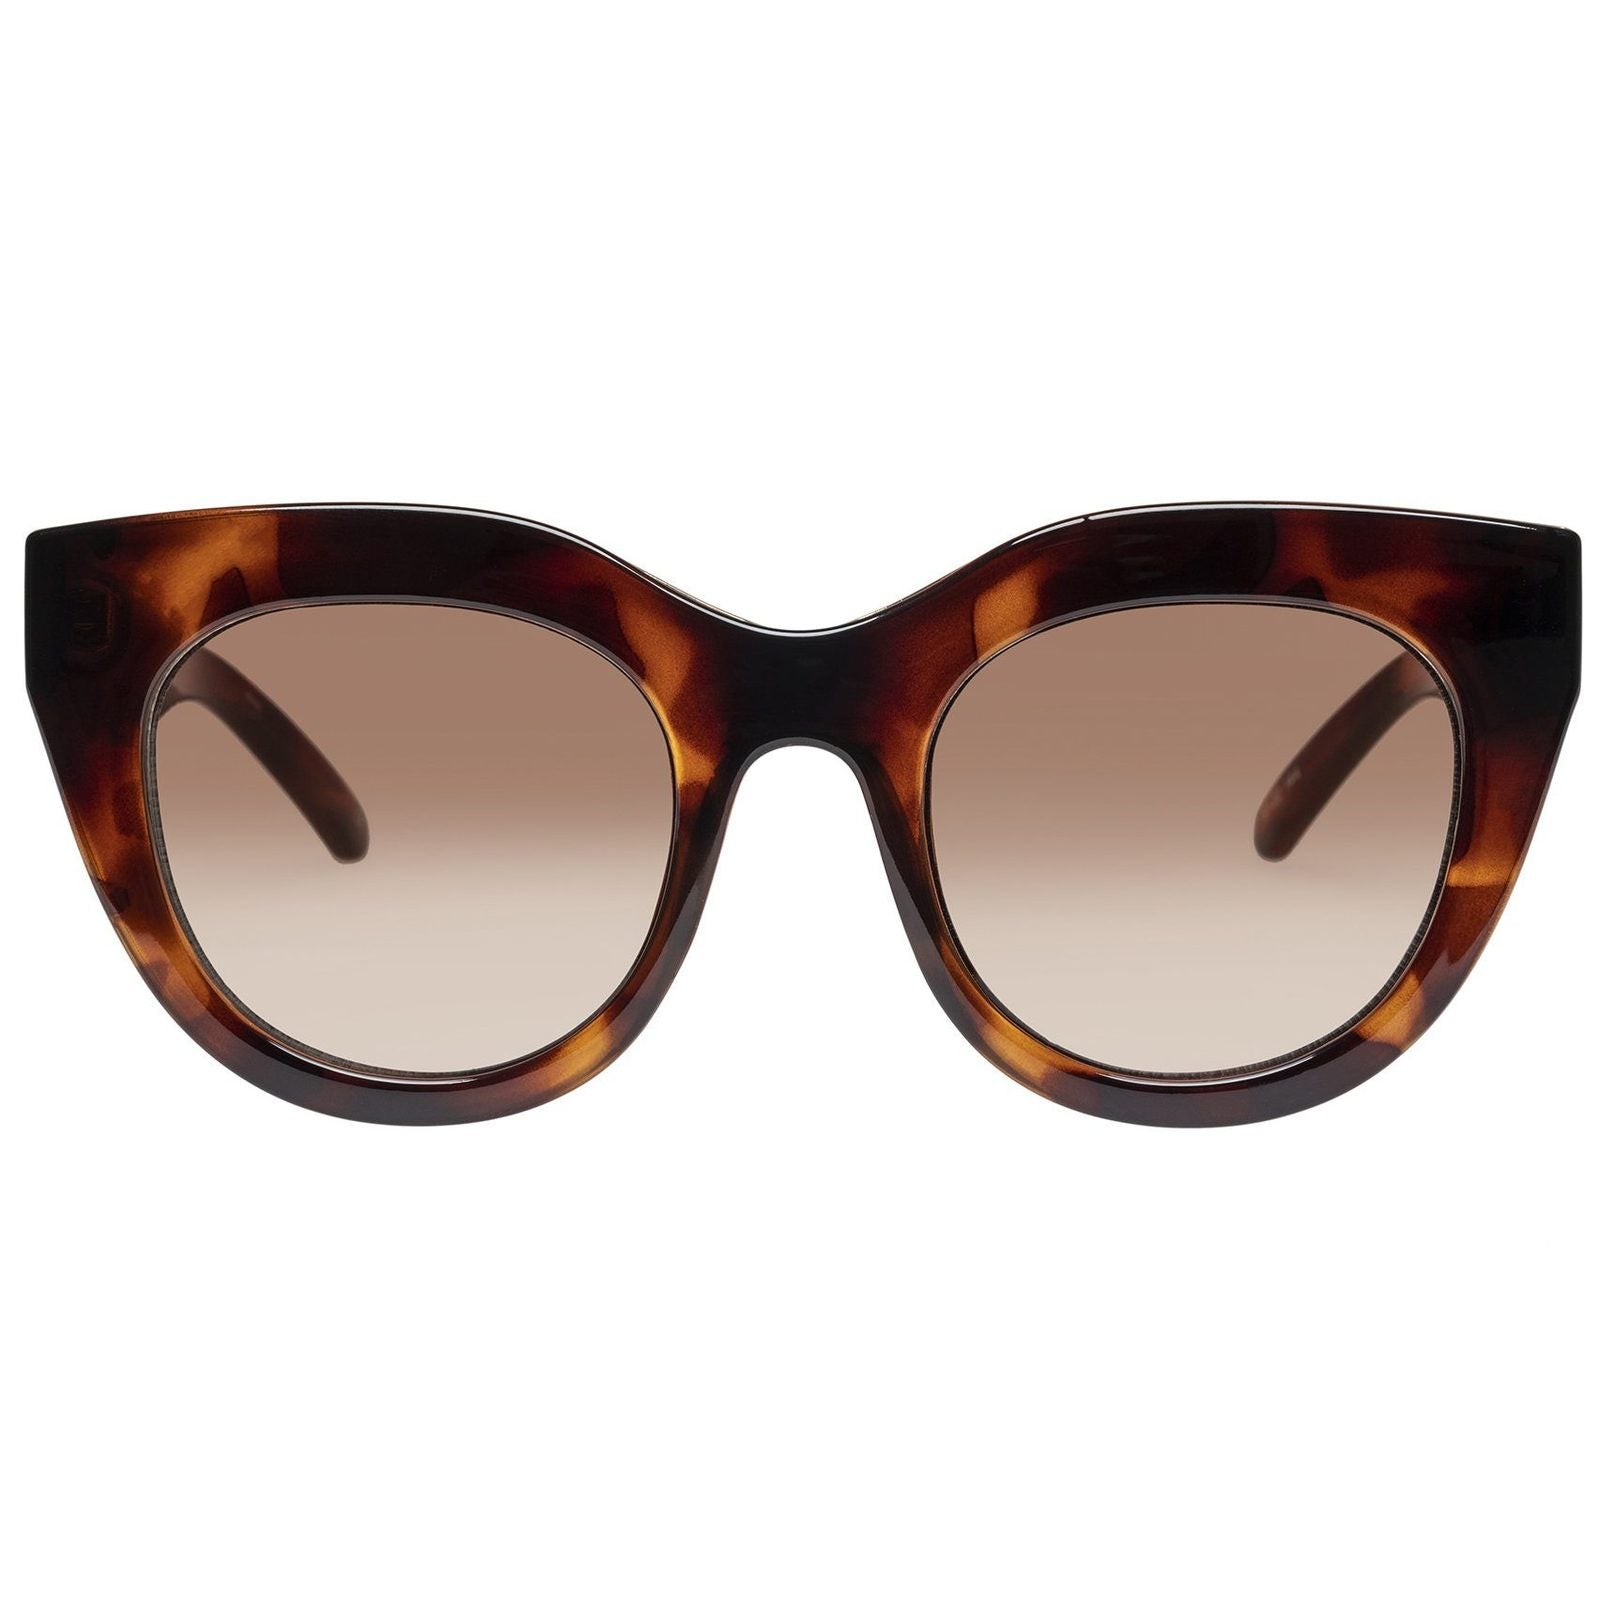 LE SPECS - AIR HEART SUNGLASSES IN TORT